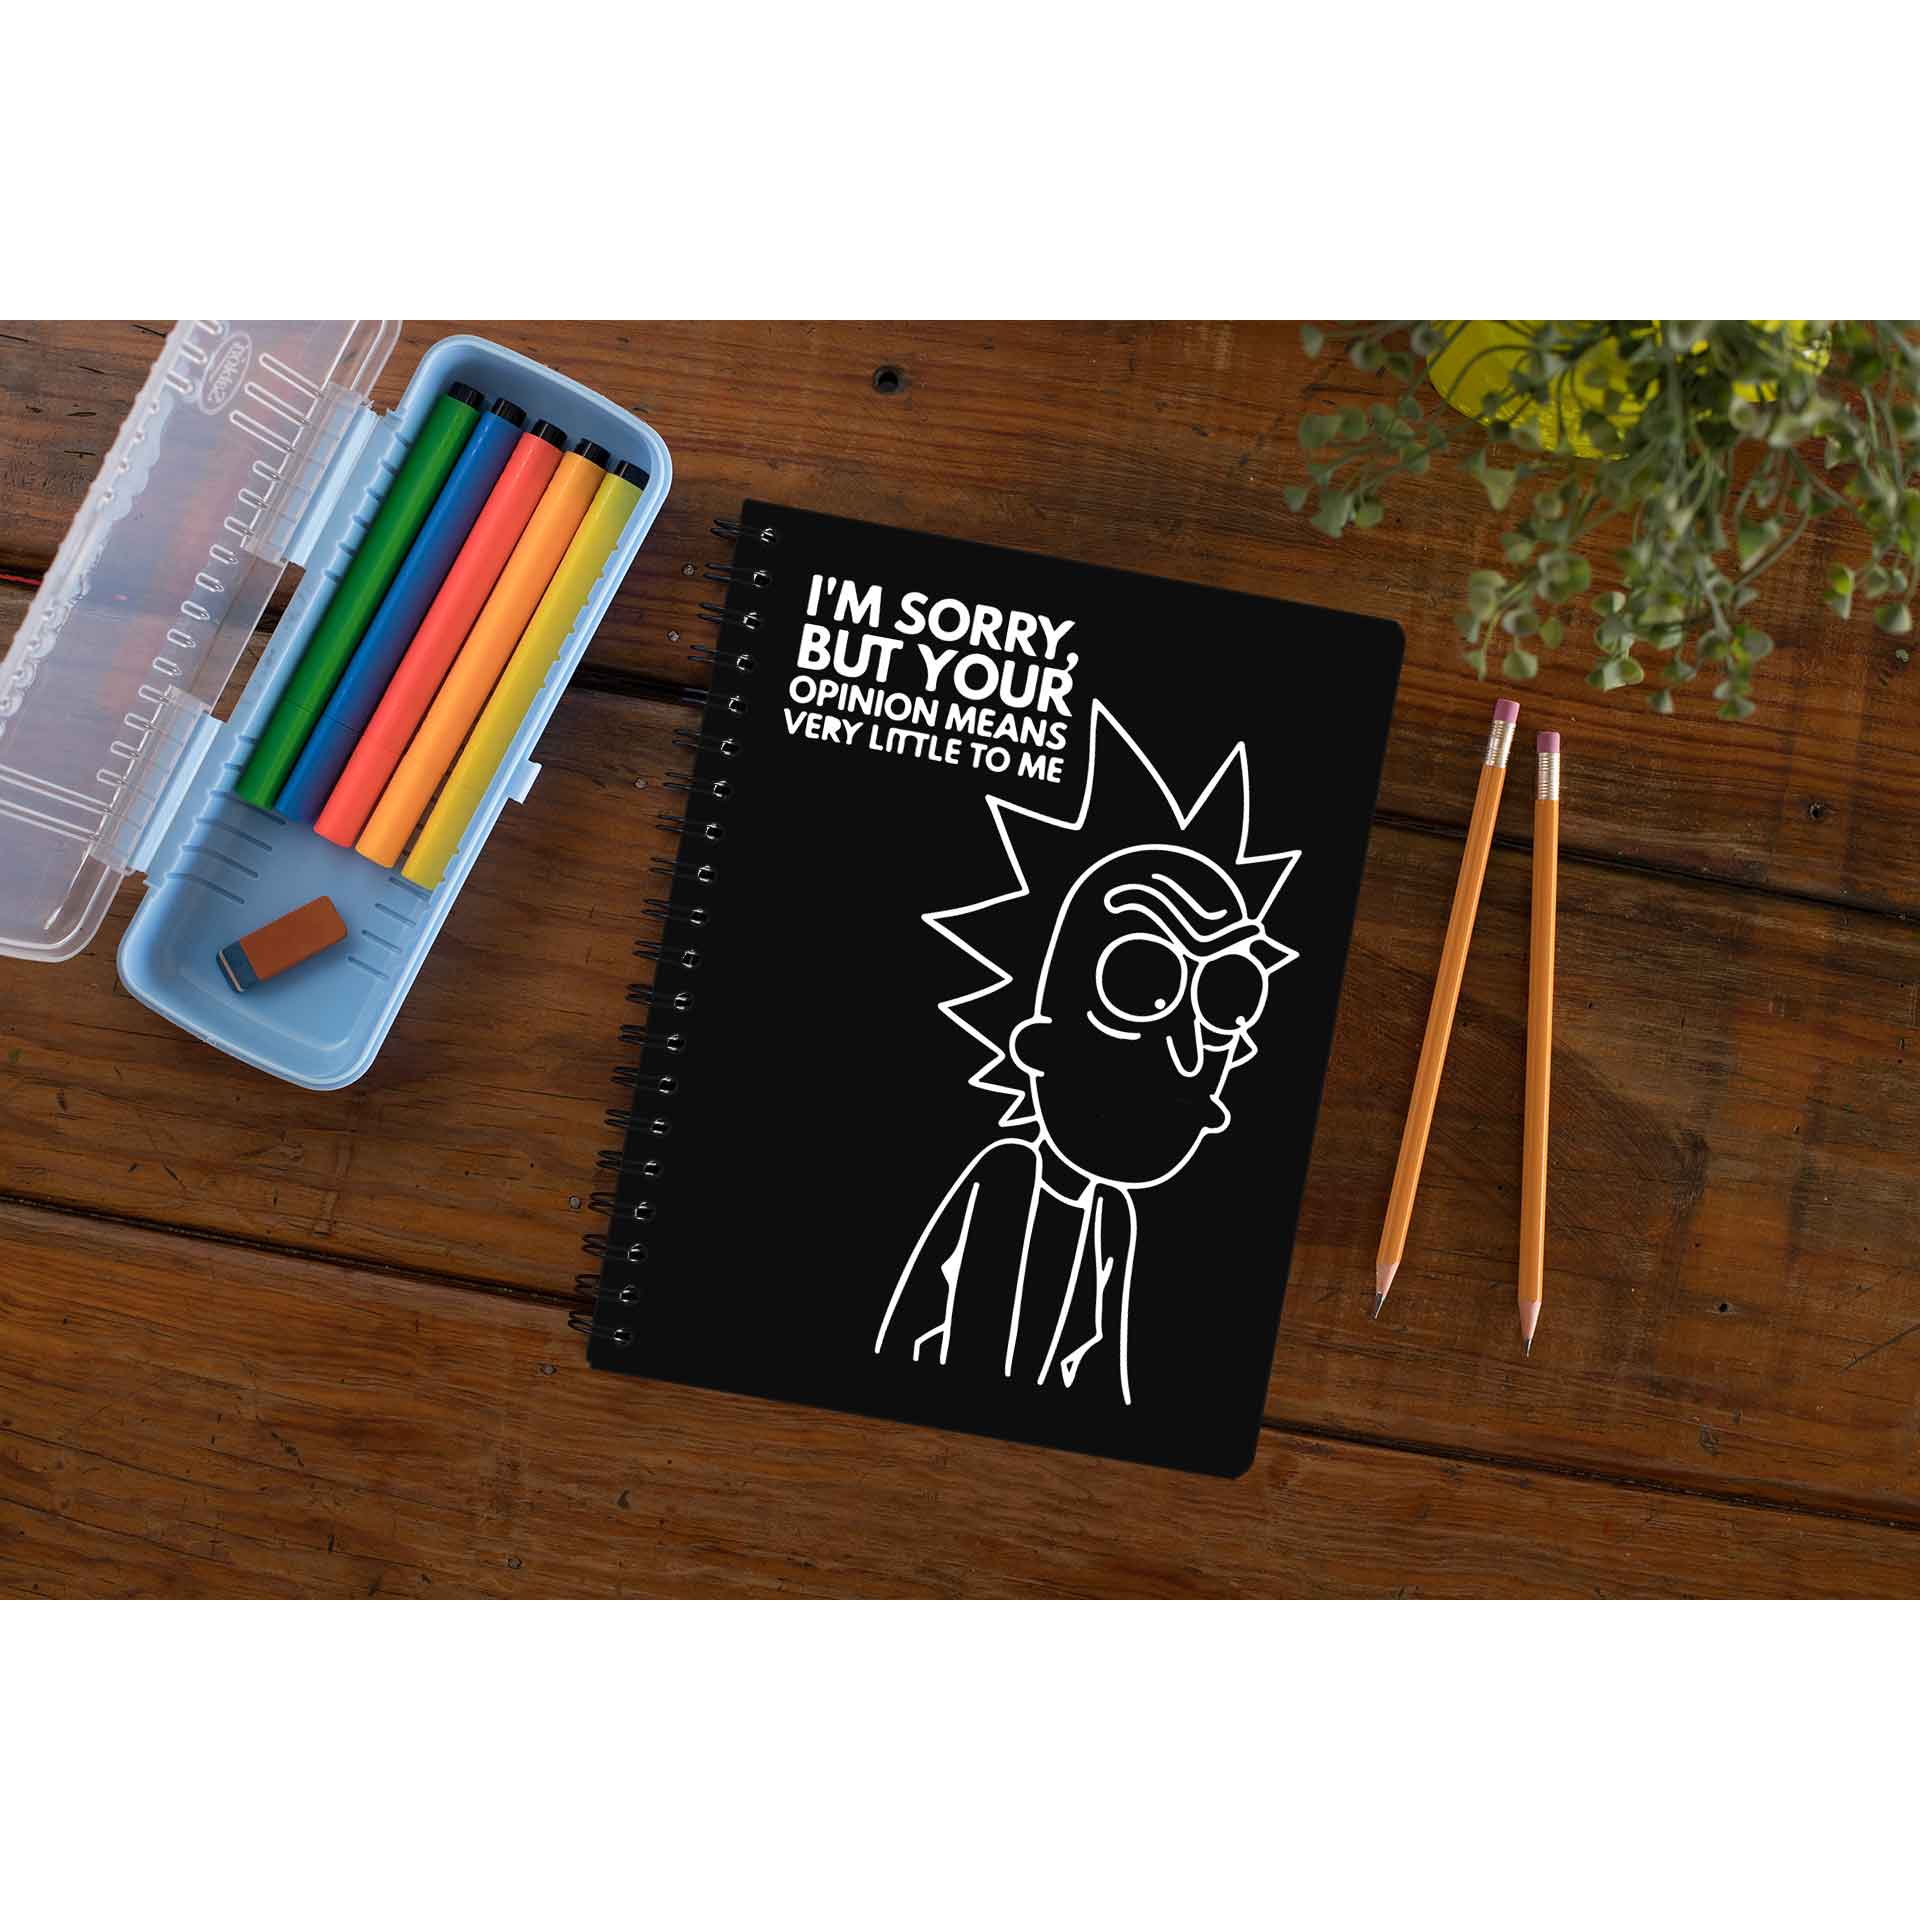 rick and morty opinion notebook notepad diary buy online india the banyan tee tbt unruled rick and morty online summer beth mr meeseeks jerry quote vector art clothing accessories merchandise